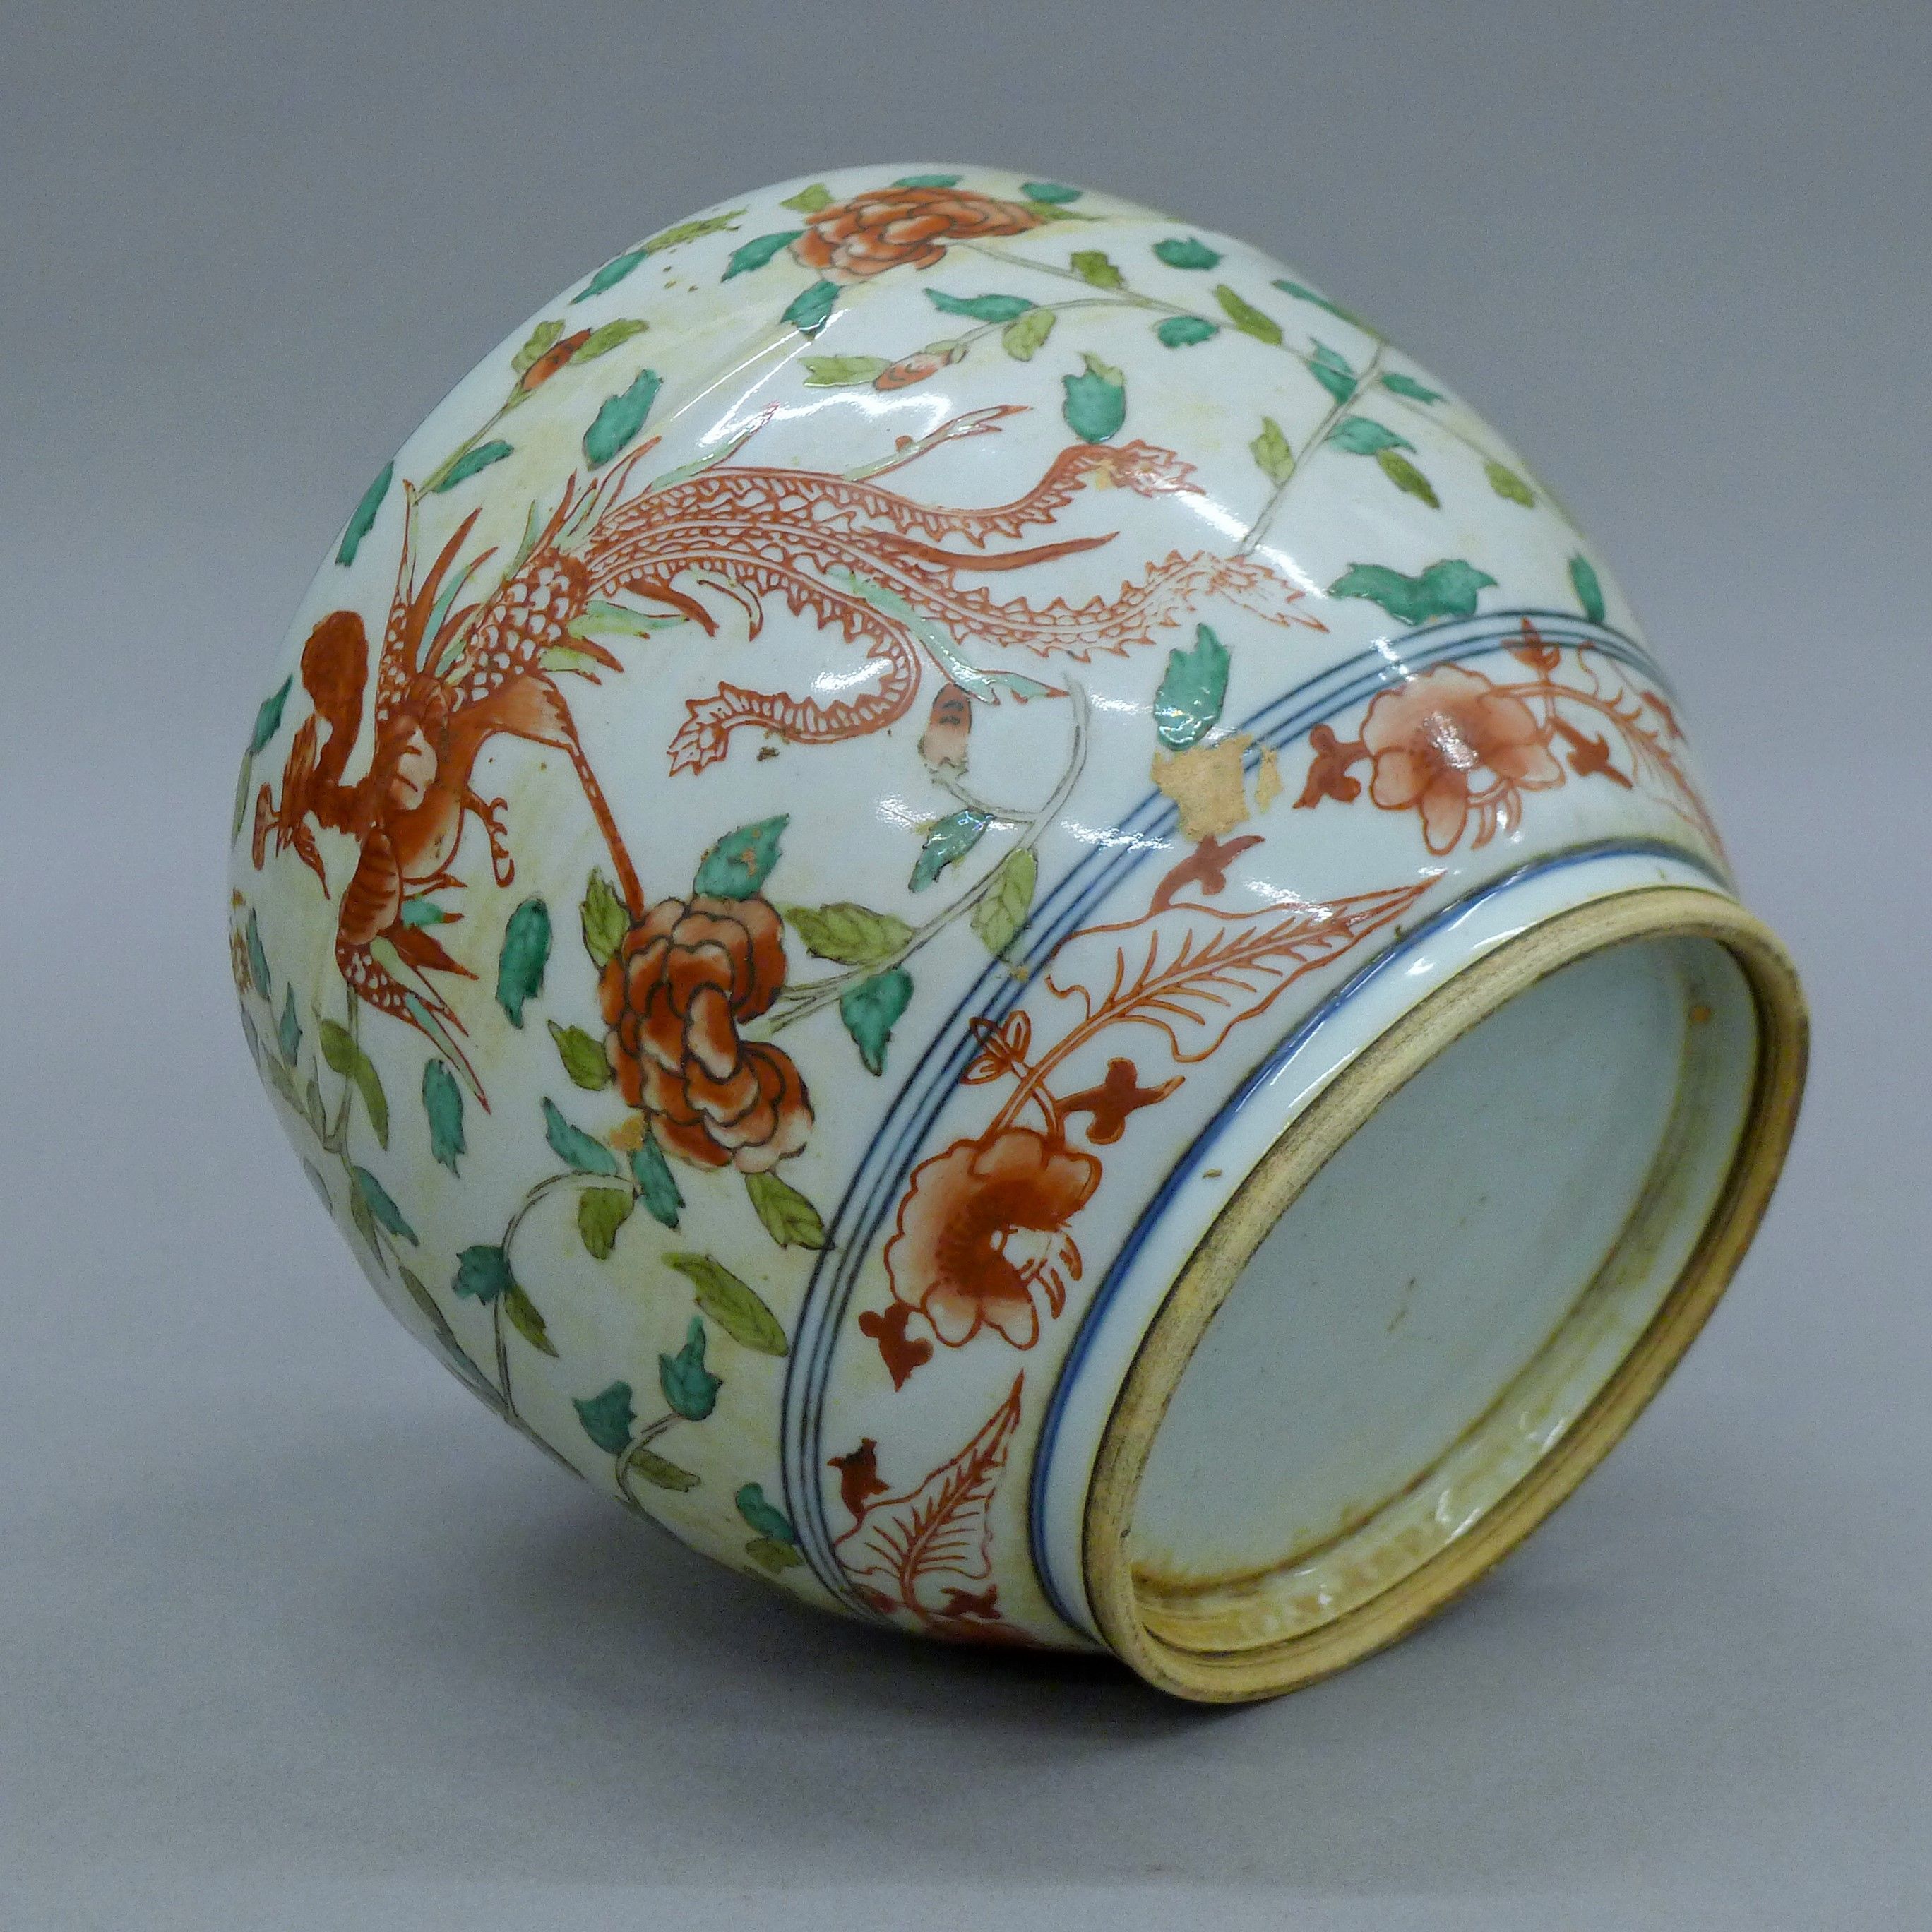 A 20th century Chinese Wucai enamelled ginger jar depicting a pair of phoenixes amongst a floral - Image 7 of 7